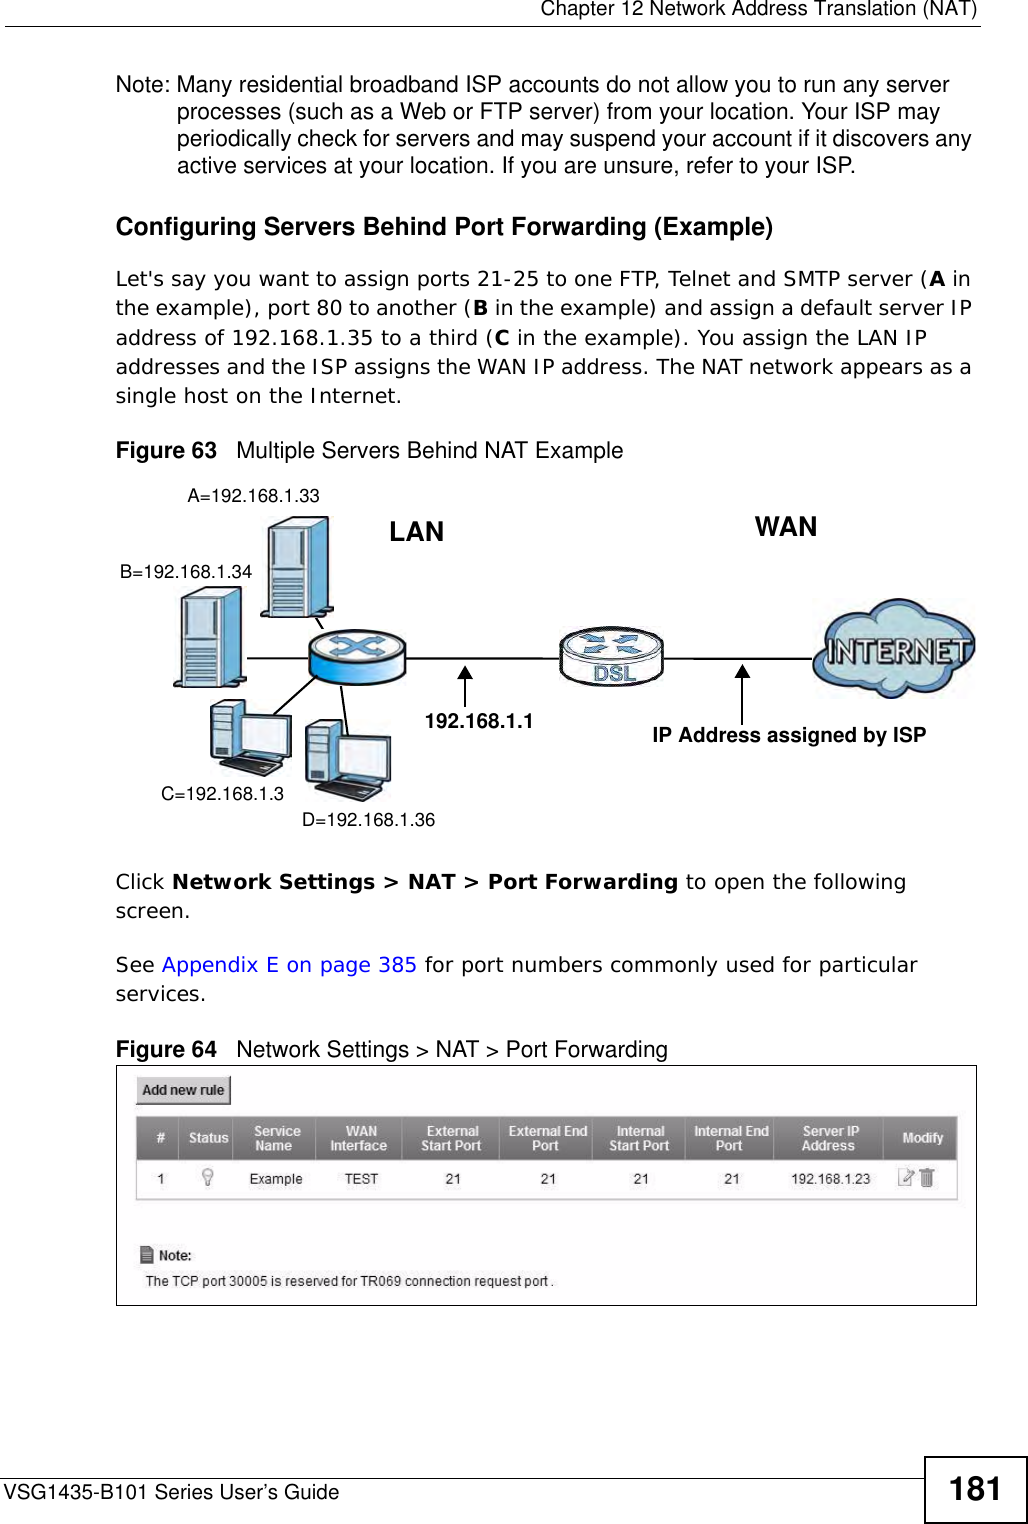  Chapter 12 Network Address Translation (NAT)VSG1435-B101 Series User’s Guide 181Note: Many residential broadband ISP accounts do not allow you to run any server processes (such as a Web or FTP server) from your location. Your ISP may periodically check for servers and may suspend your account if it discovers any active services at your location. If you are unsure, refer to your ISP.Configuring Servers Behind Port Forwarding (Example)Let&apos;s say you want to assign ports 21-25 to one FTP, Telnet and SMTP server (A in the example), port 80 to another (B in the example) and assign a default server IP address of 192.168.1.35 to a third (C in the example). You assign the LAN IP addresses and the ISP assigns the WAN IP address. The NAT network appears as a single host on the Internet.Figure 63   Multiple Servers Behind NAT ExampleClick Network Settings &gt; NAT &gt; Port Forwarding to open the following screen.See Appendix E on page 385 for port numbers commonly used for particular services. Figure 64   Network Settings &gt; NAT &gt; Port ForwardingA=192.168.1.33D=192.168.1.36C=192.168.1.3B=192.168.1.34WANLAN192.168.1.1 IP Address assigned by ISP